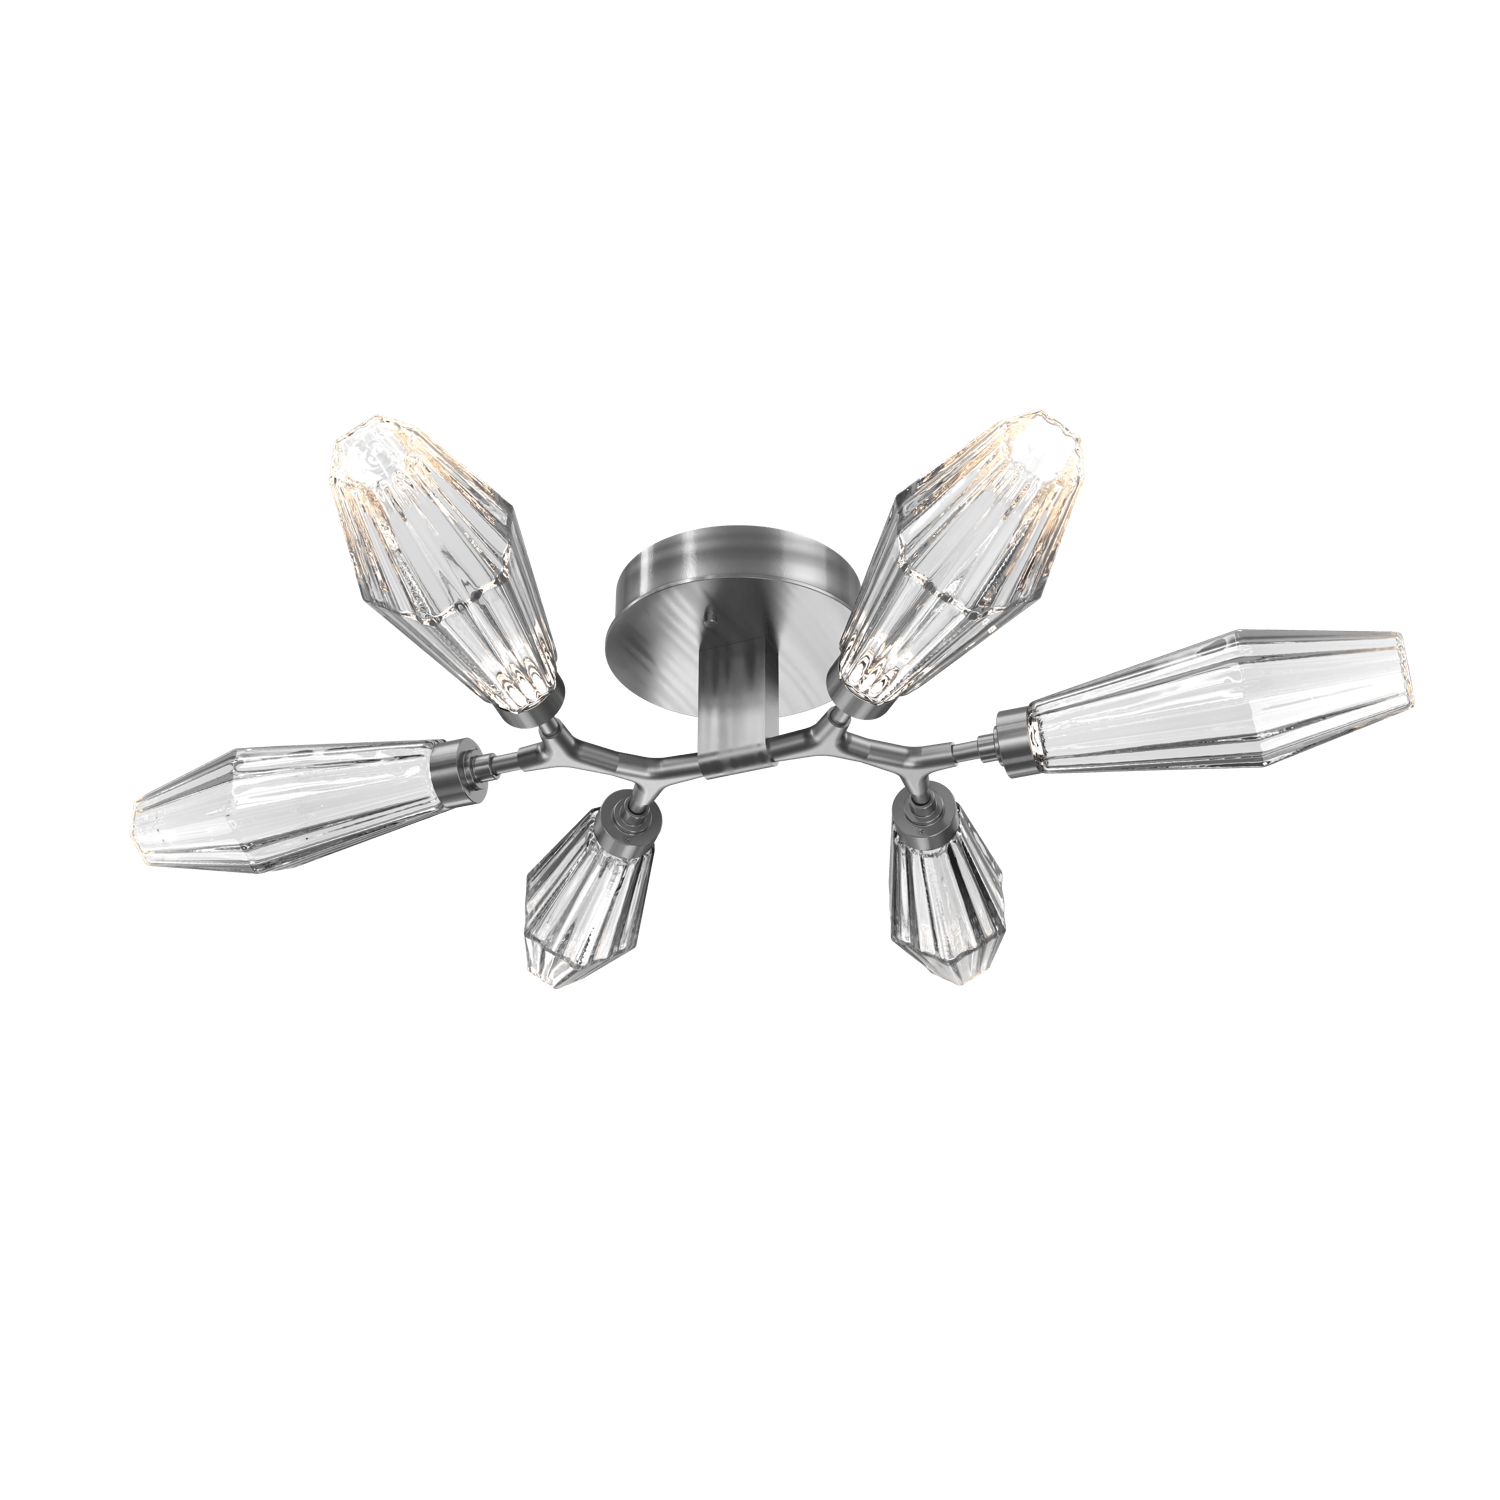 CLB0049-01-SN-RC-Hammerton-Studio-Aalto-6-light-organic-flush-mount-light-with-satin-nickel-finish-and-optic-ribbed-clear-glass-shades-and-LED-lamping